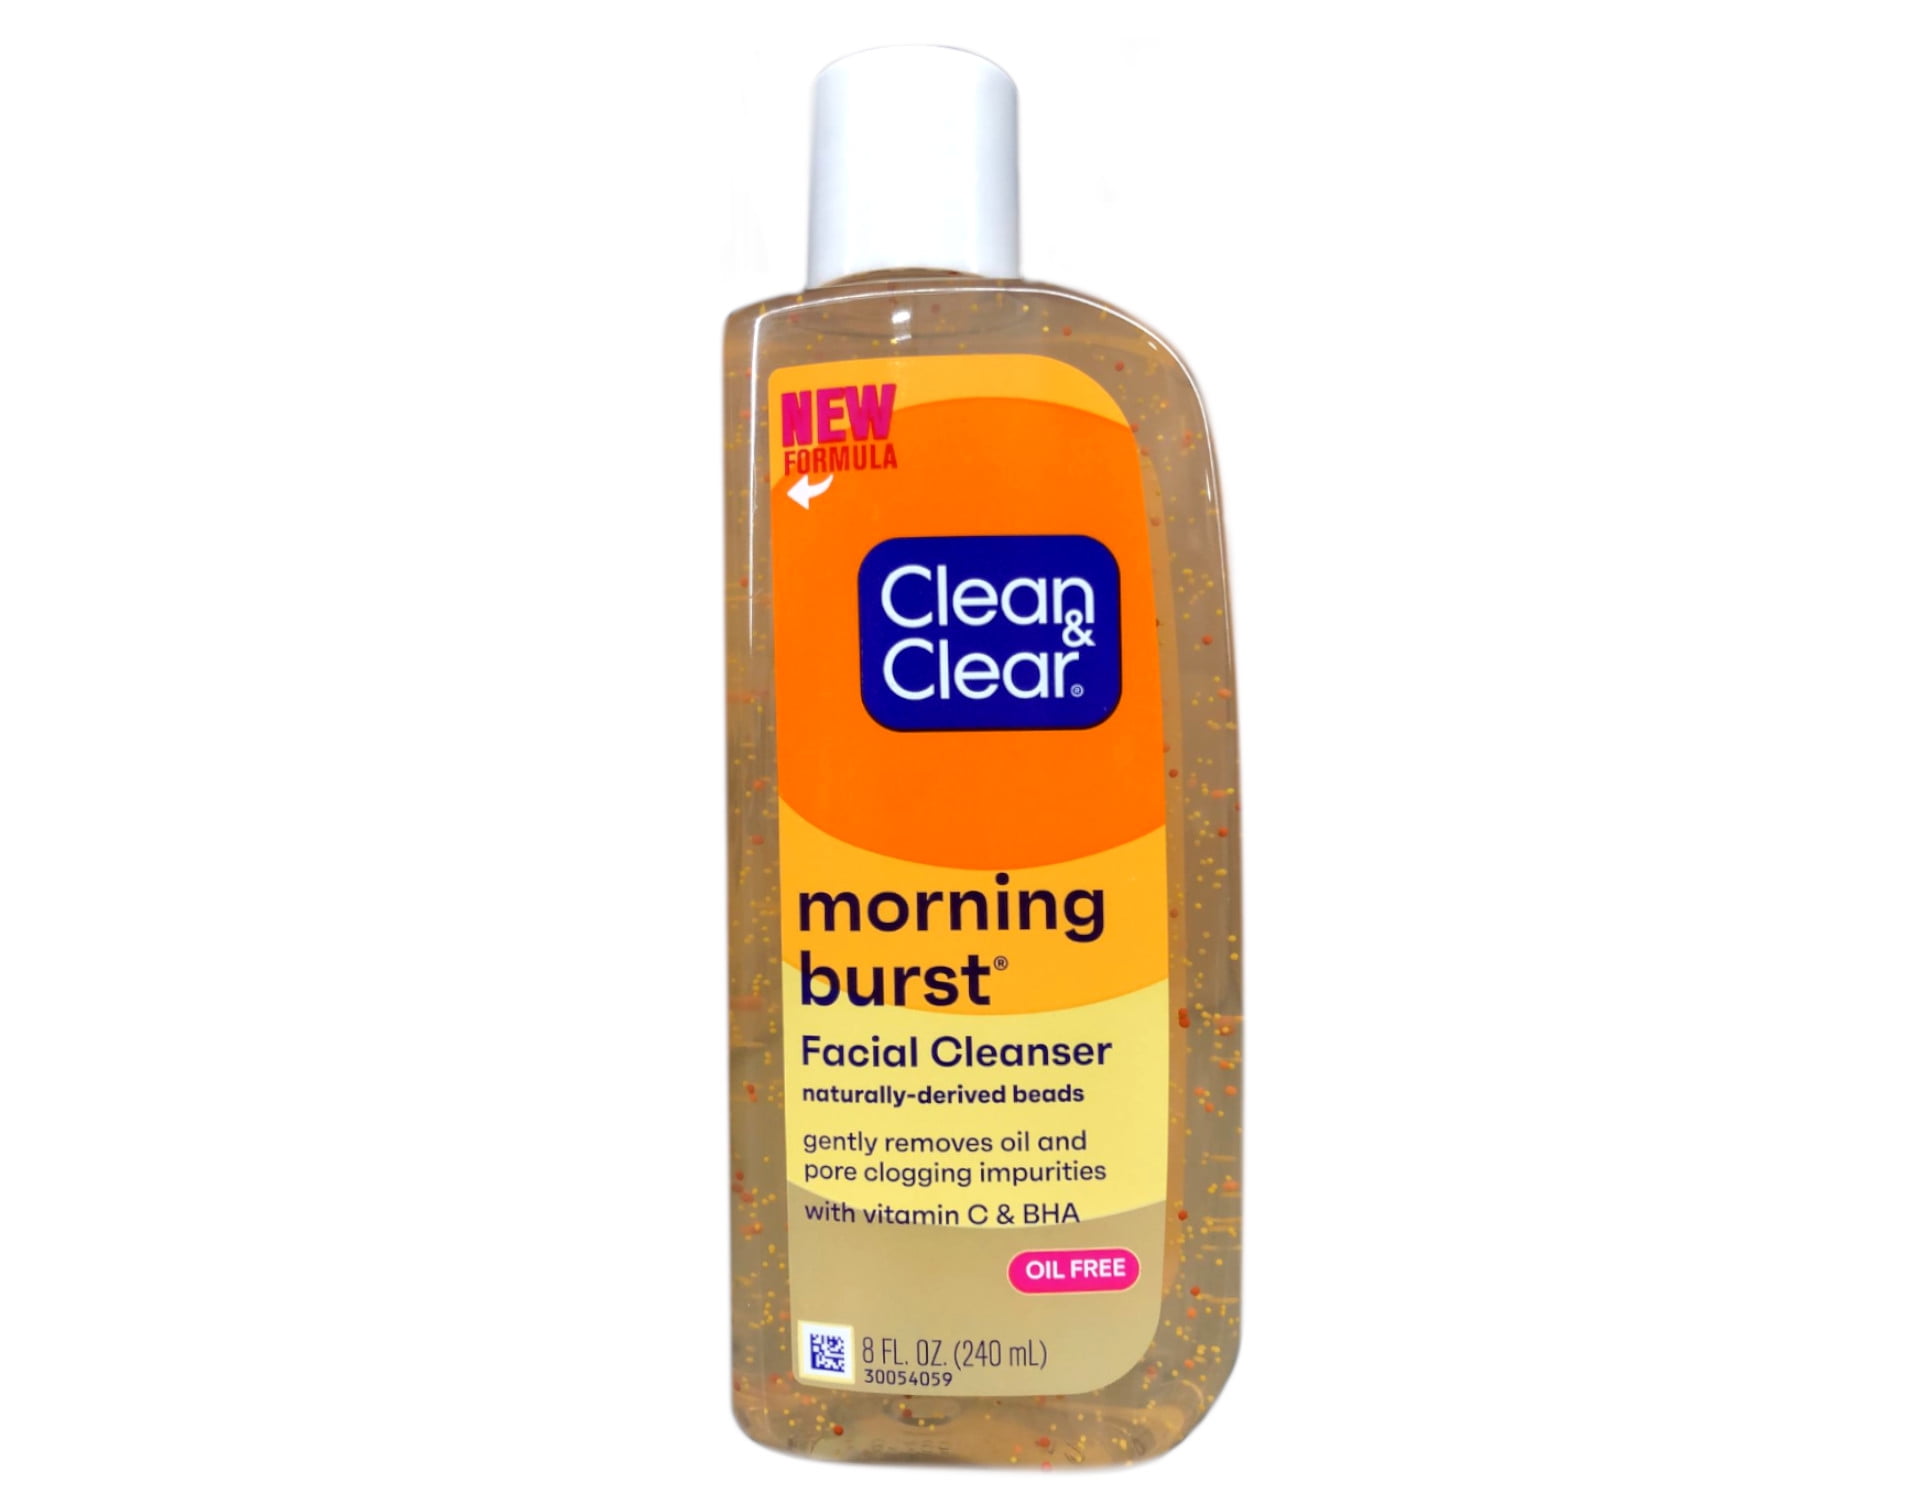 Clean & Clear Morning Burst Oil-Free Hydrating Face Cleanser, 8 fl. oz 